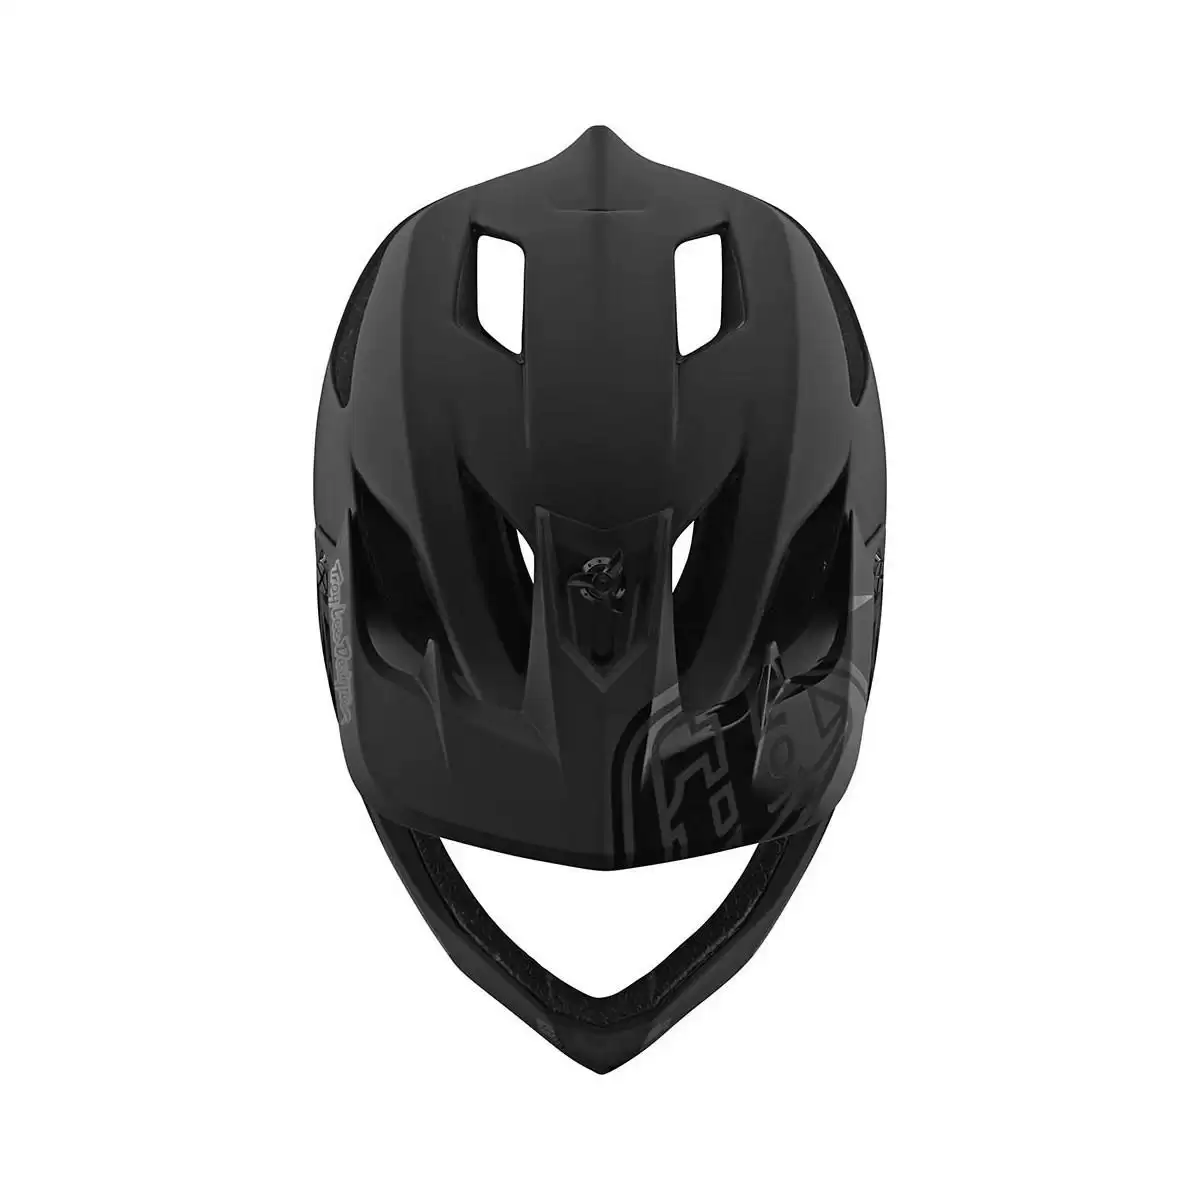 Full Face Helmet Stage MIPS Stealth Midnight Black Size M/L (57-59cm) #2